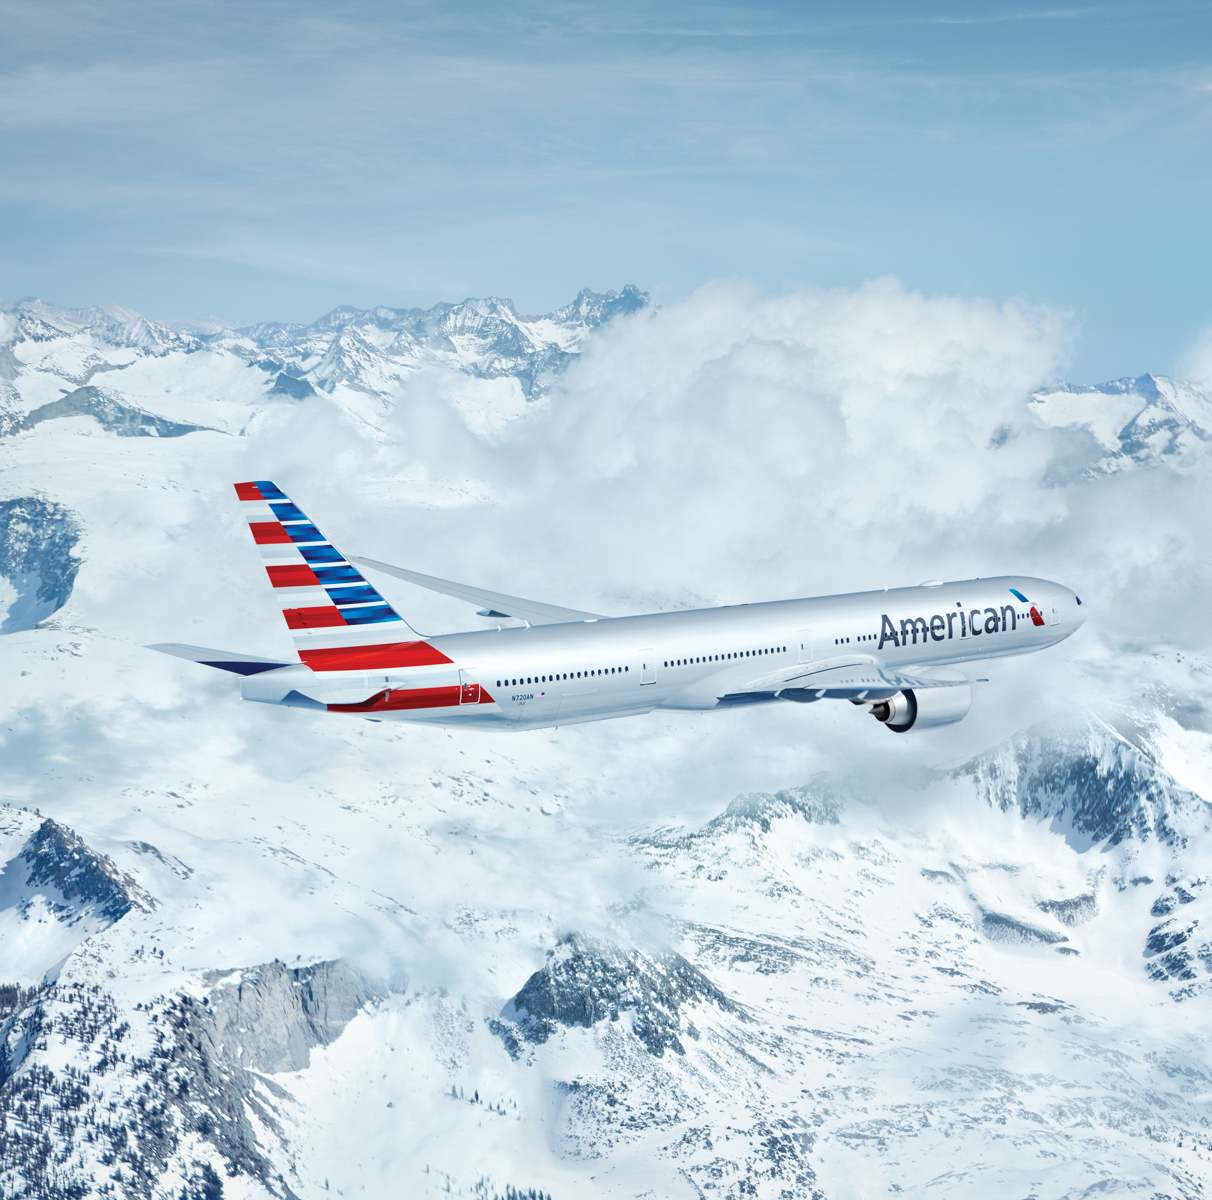 How To Fly With American Airlines Flights?